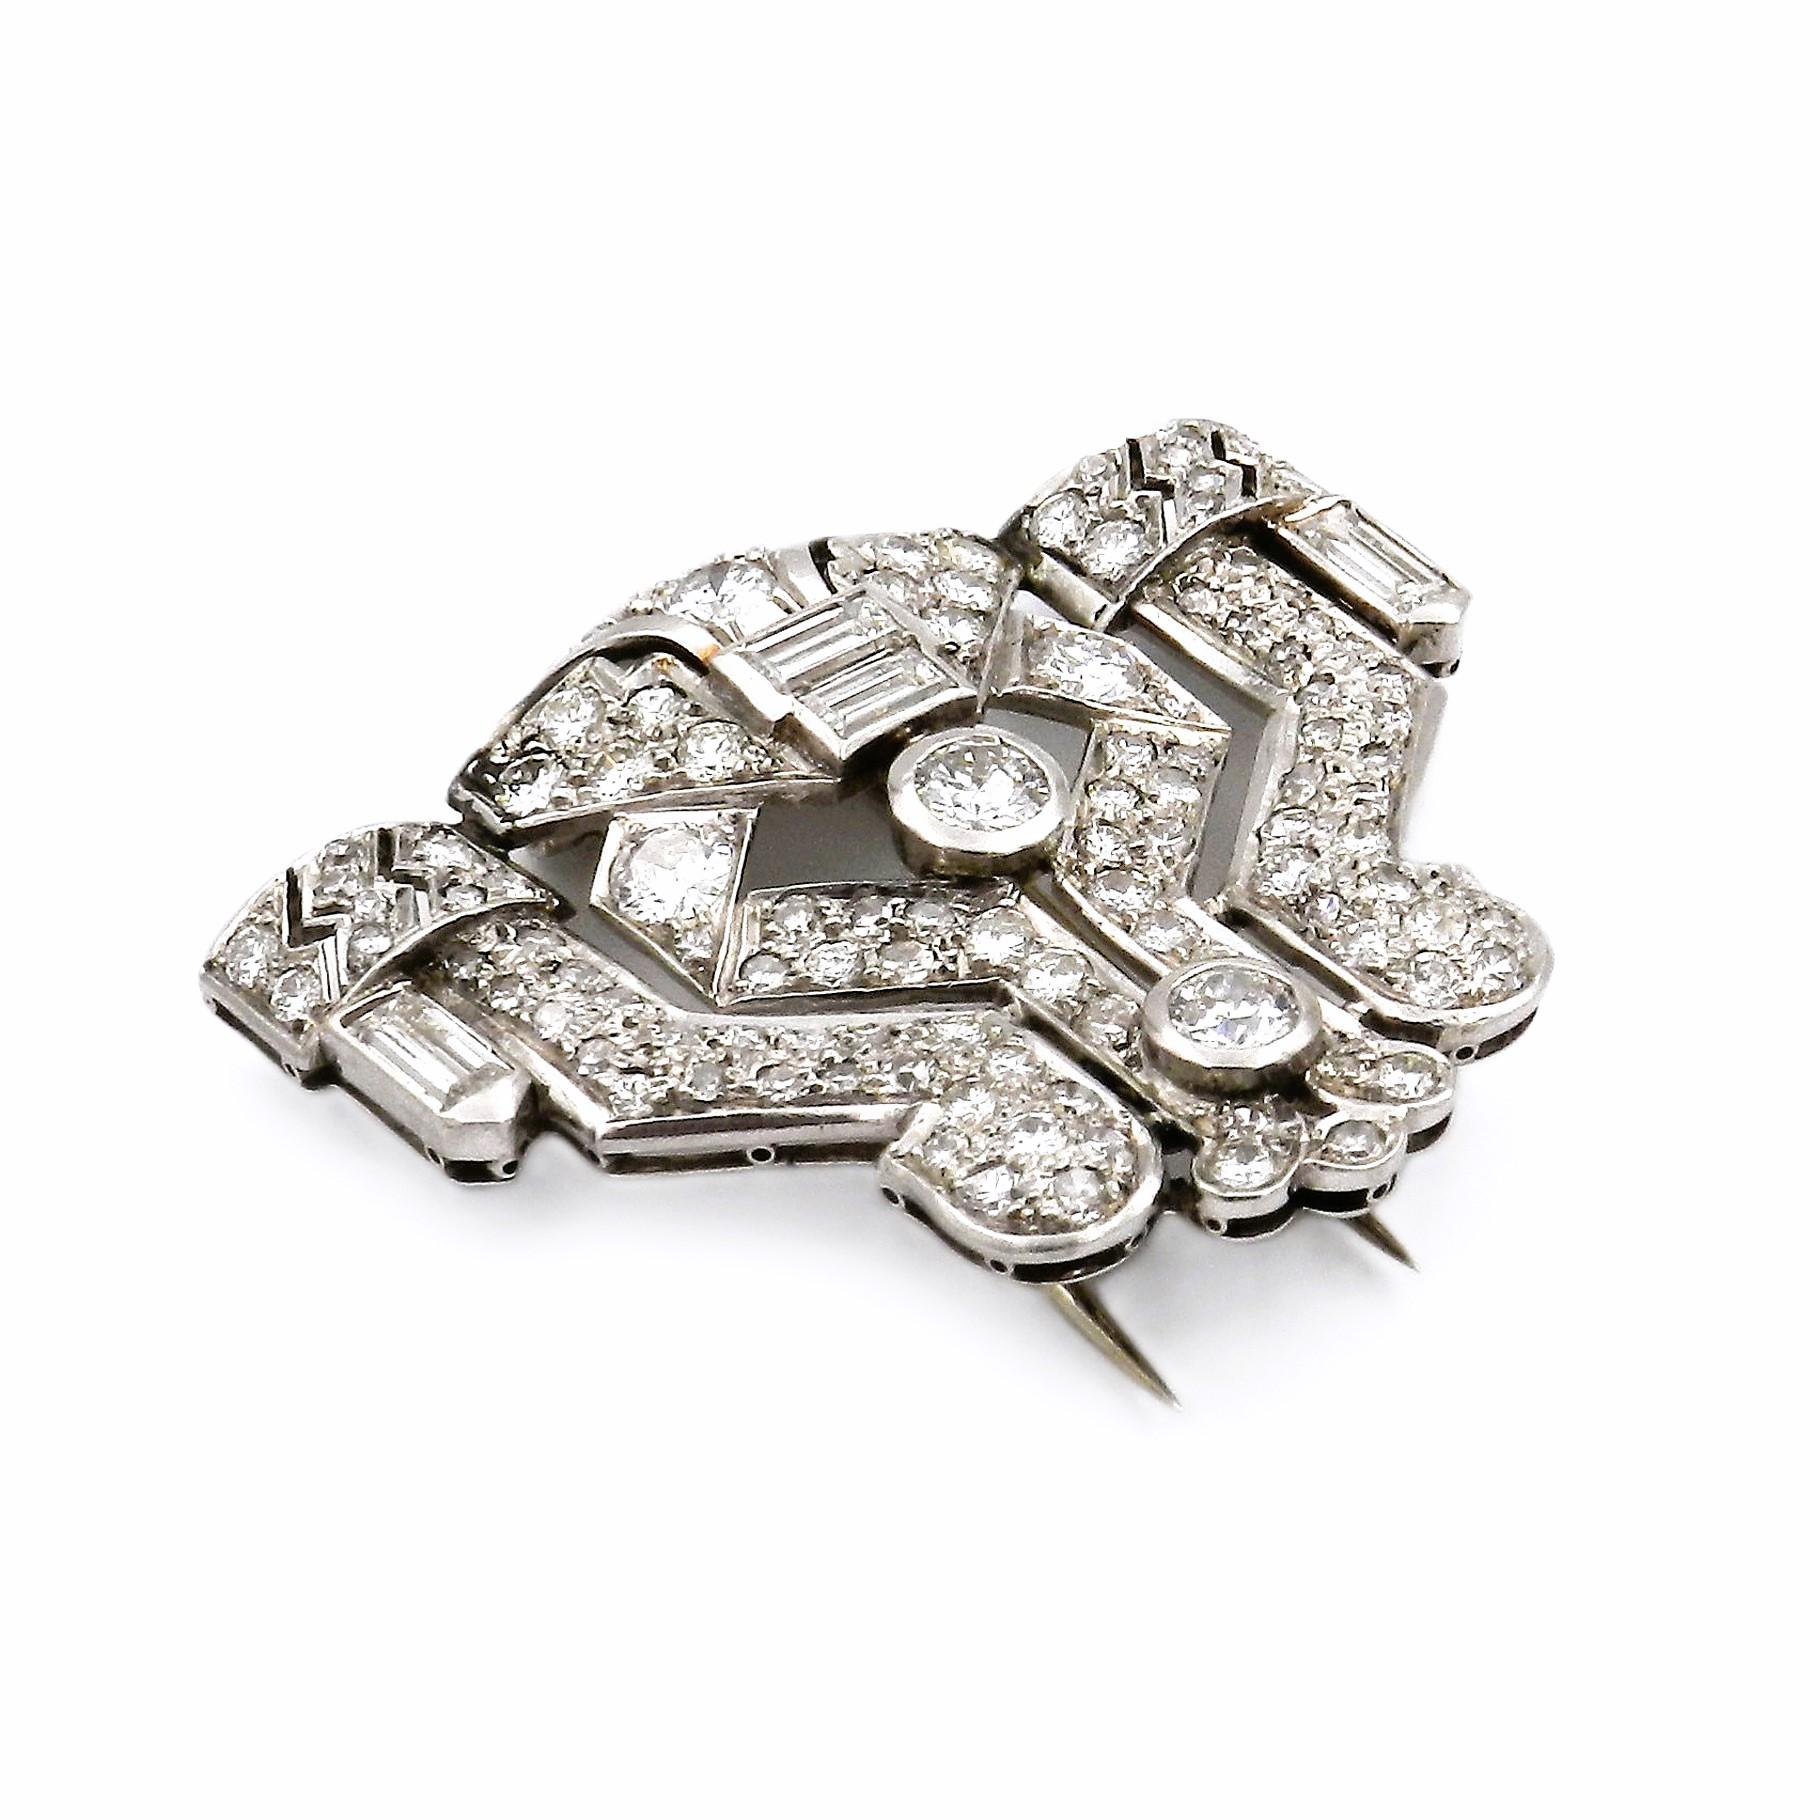 Art Deco 2.59 Carat Diamond 18K White Gold Clip Brooch circa 1925

A decorative diamond clip brooch from the Art Deco period, around 1925. Geometrically designed from ribbon motifs and all over set with 115 radiant diamonds totaling 2.59 ct